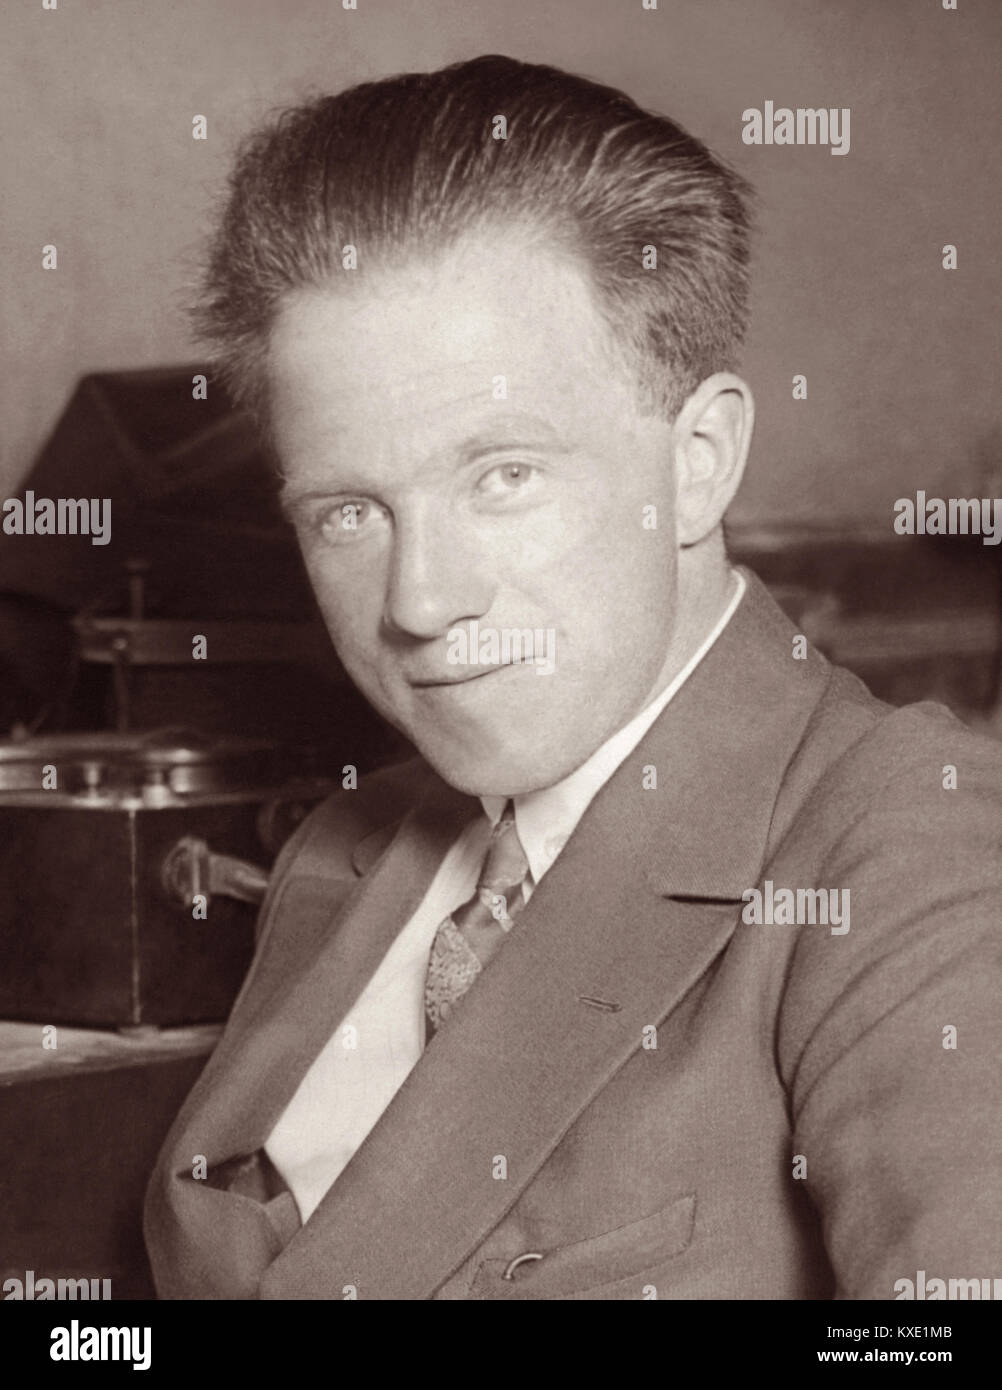 Portrait of Werner Heisenberg (1901 -1976), German theoretical physicist and a key pioneer of quantum mechanics who won the 1932 Nobel Prize in Physics for his theory and applications of quantum mechanics. Stock Photo